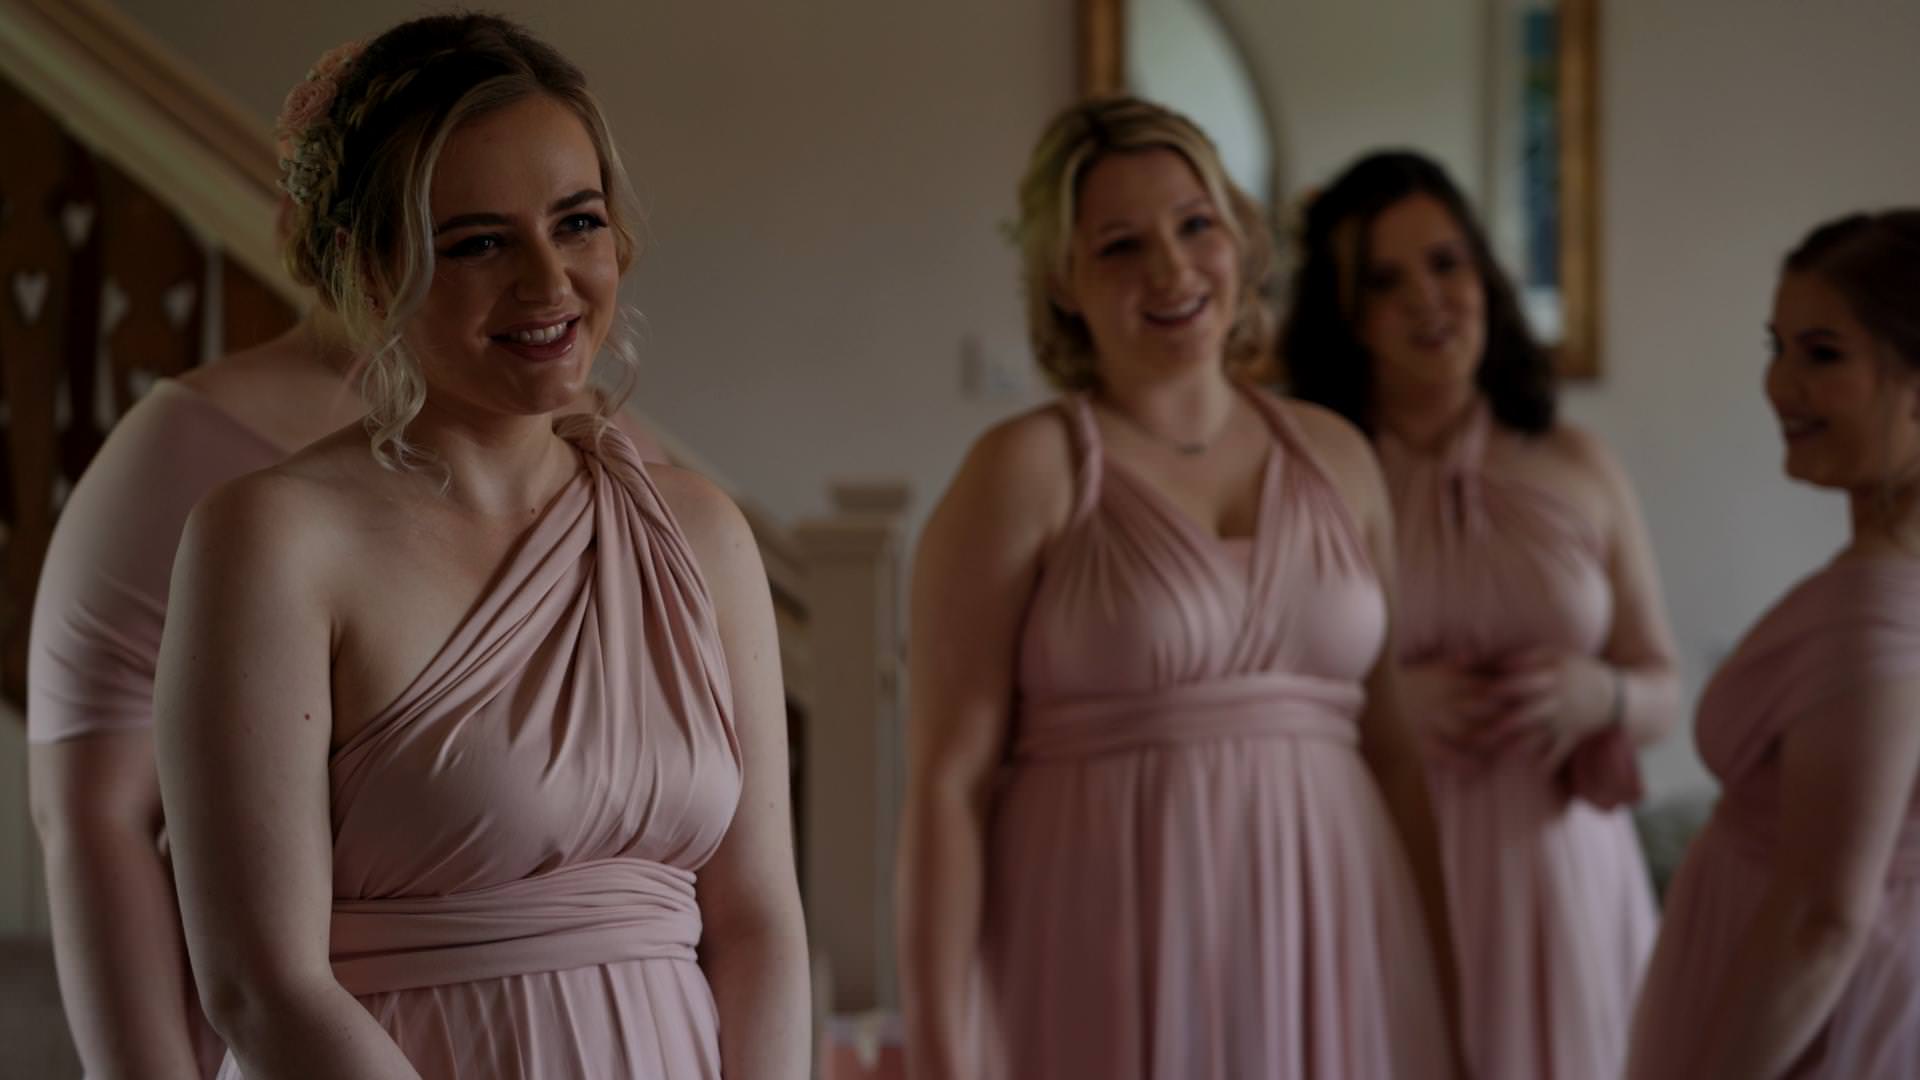 natural video moment of bridesmaids reaction to bride